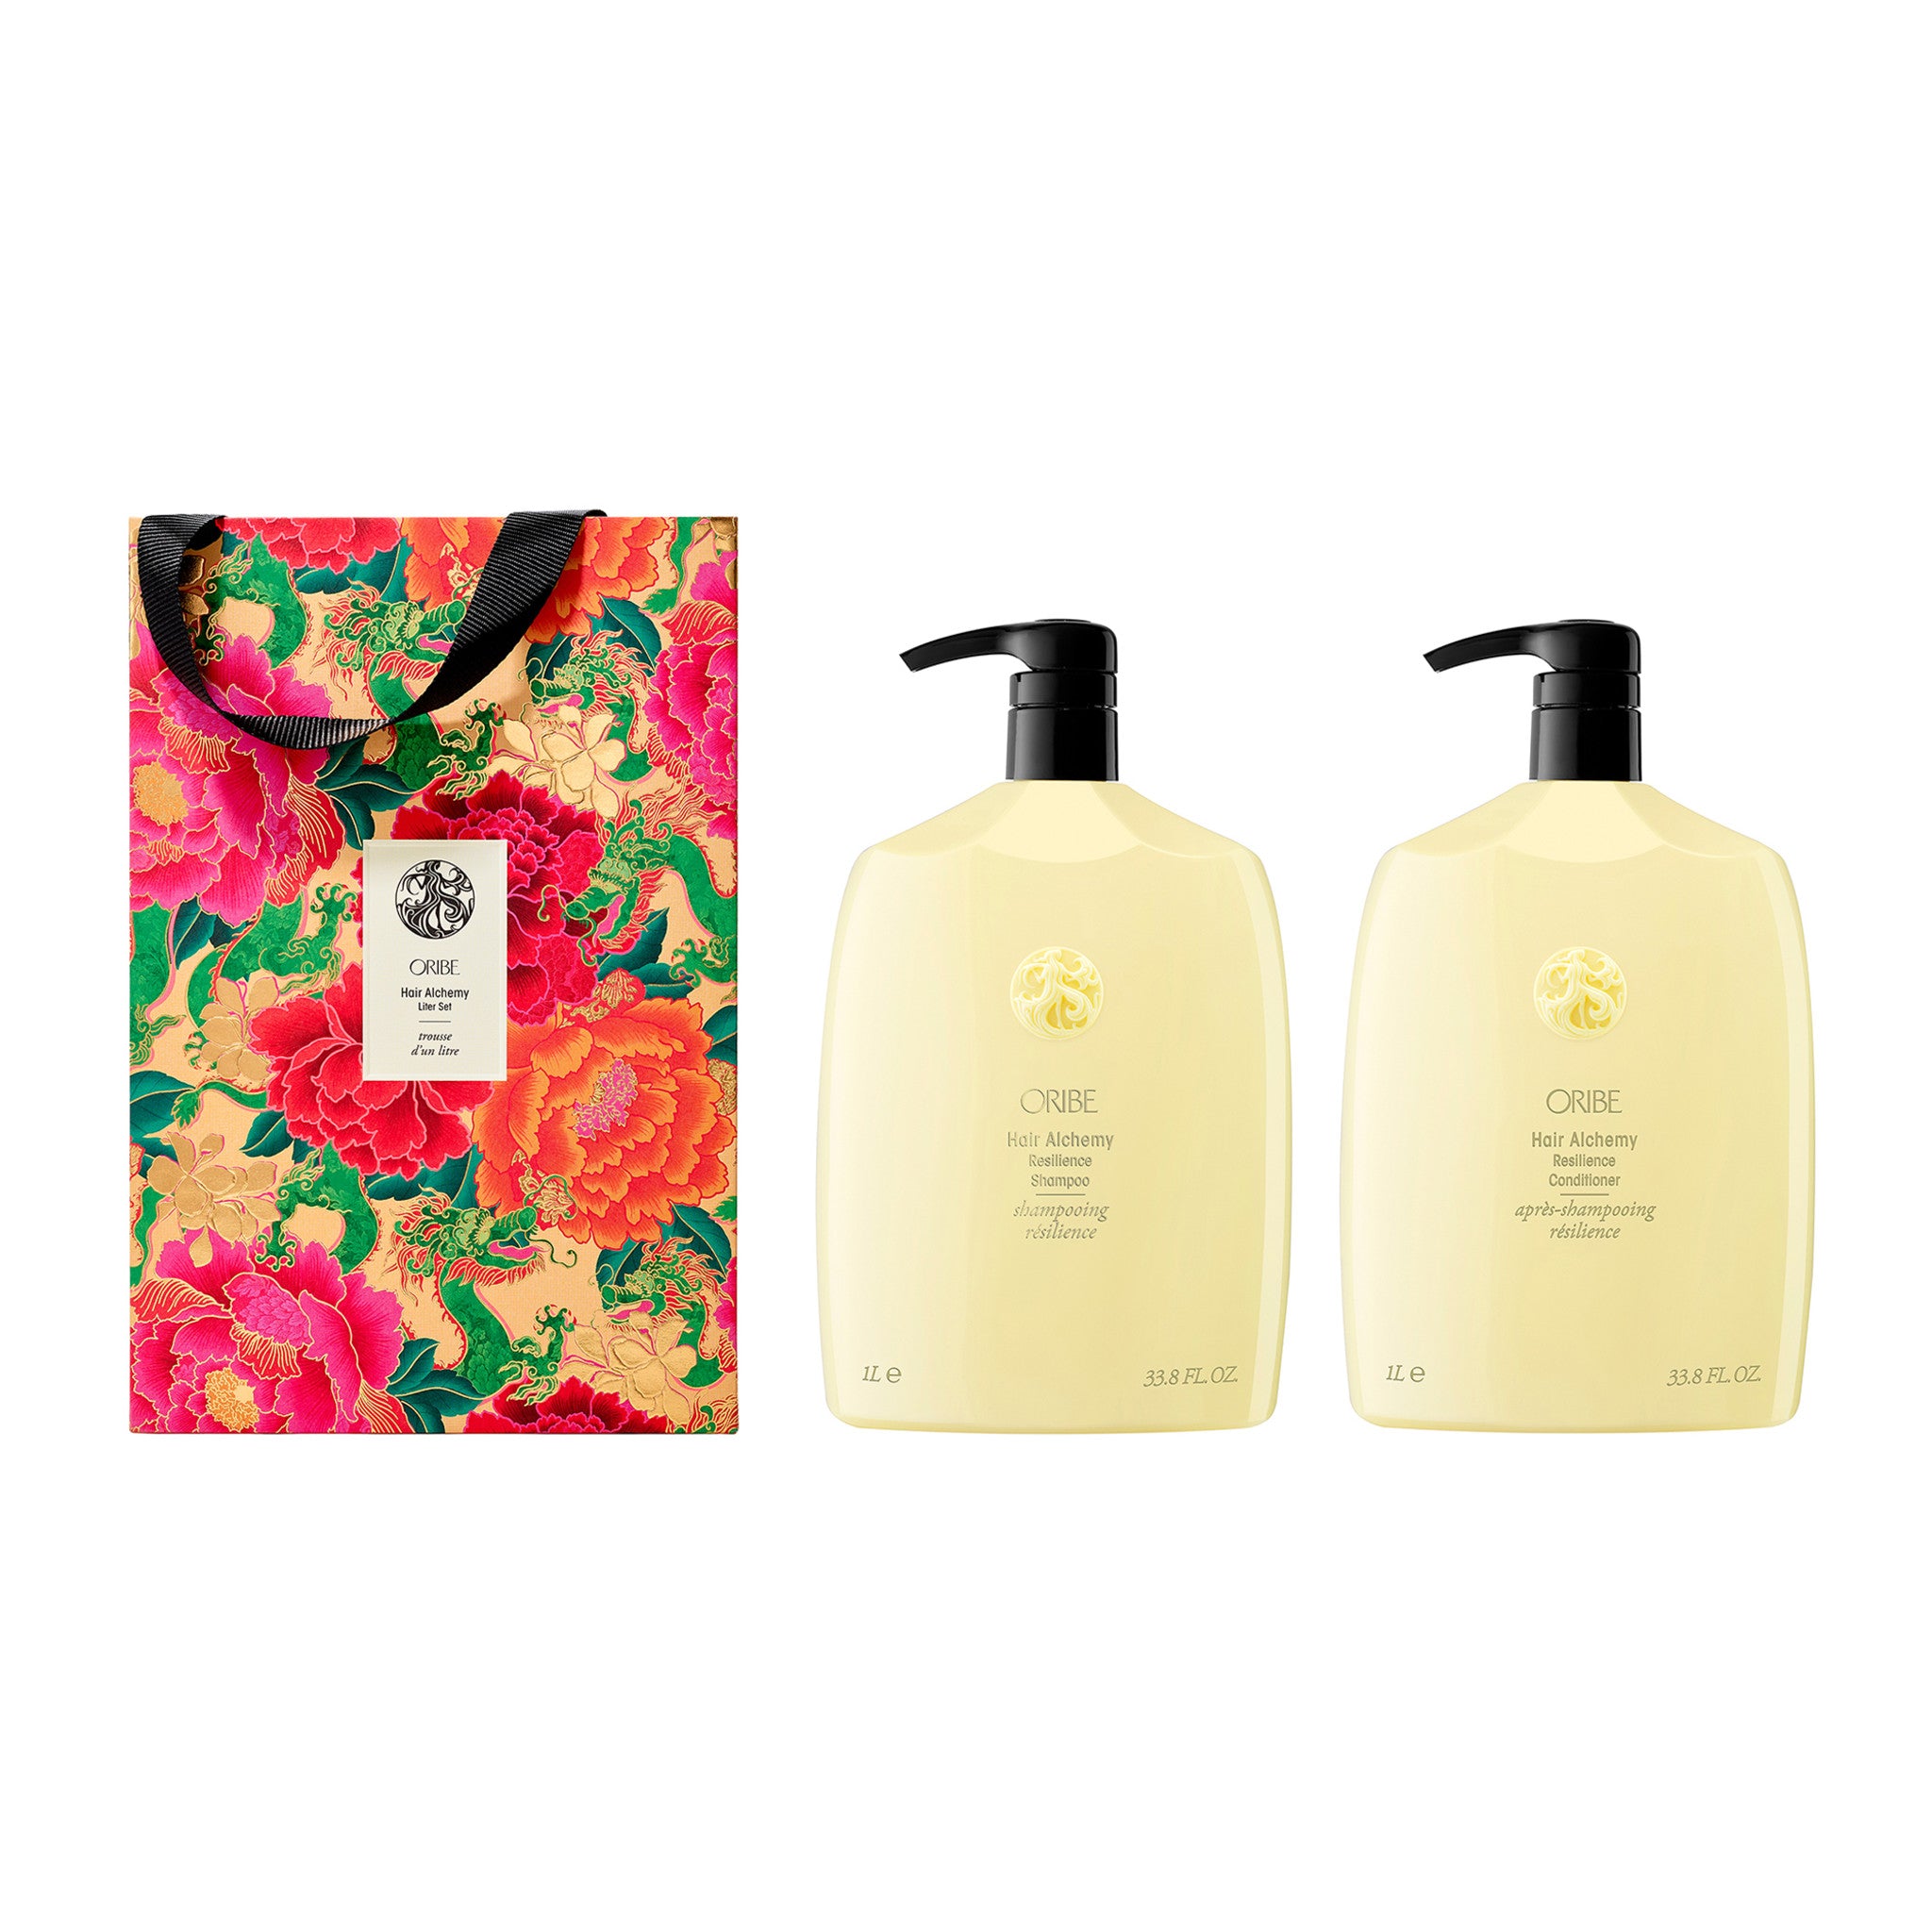 Oribe Lunar New Year Hair Alchemy Strengthening Shampoo and Conditioner Liter Set (Limited Edition) main image.